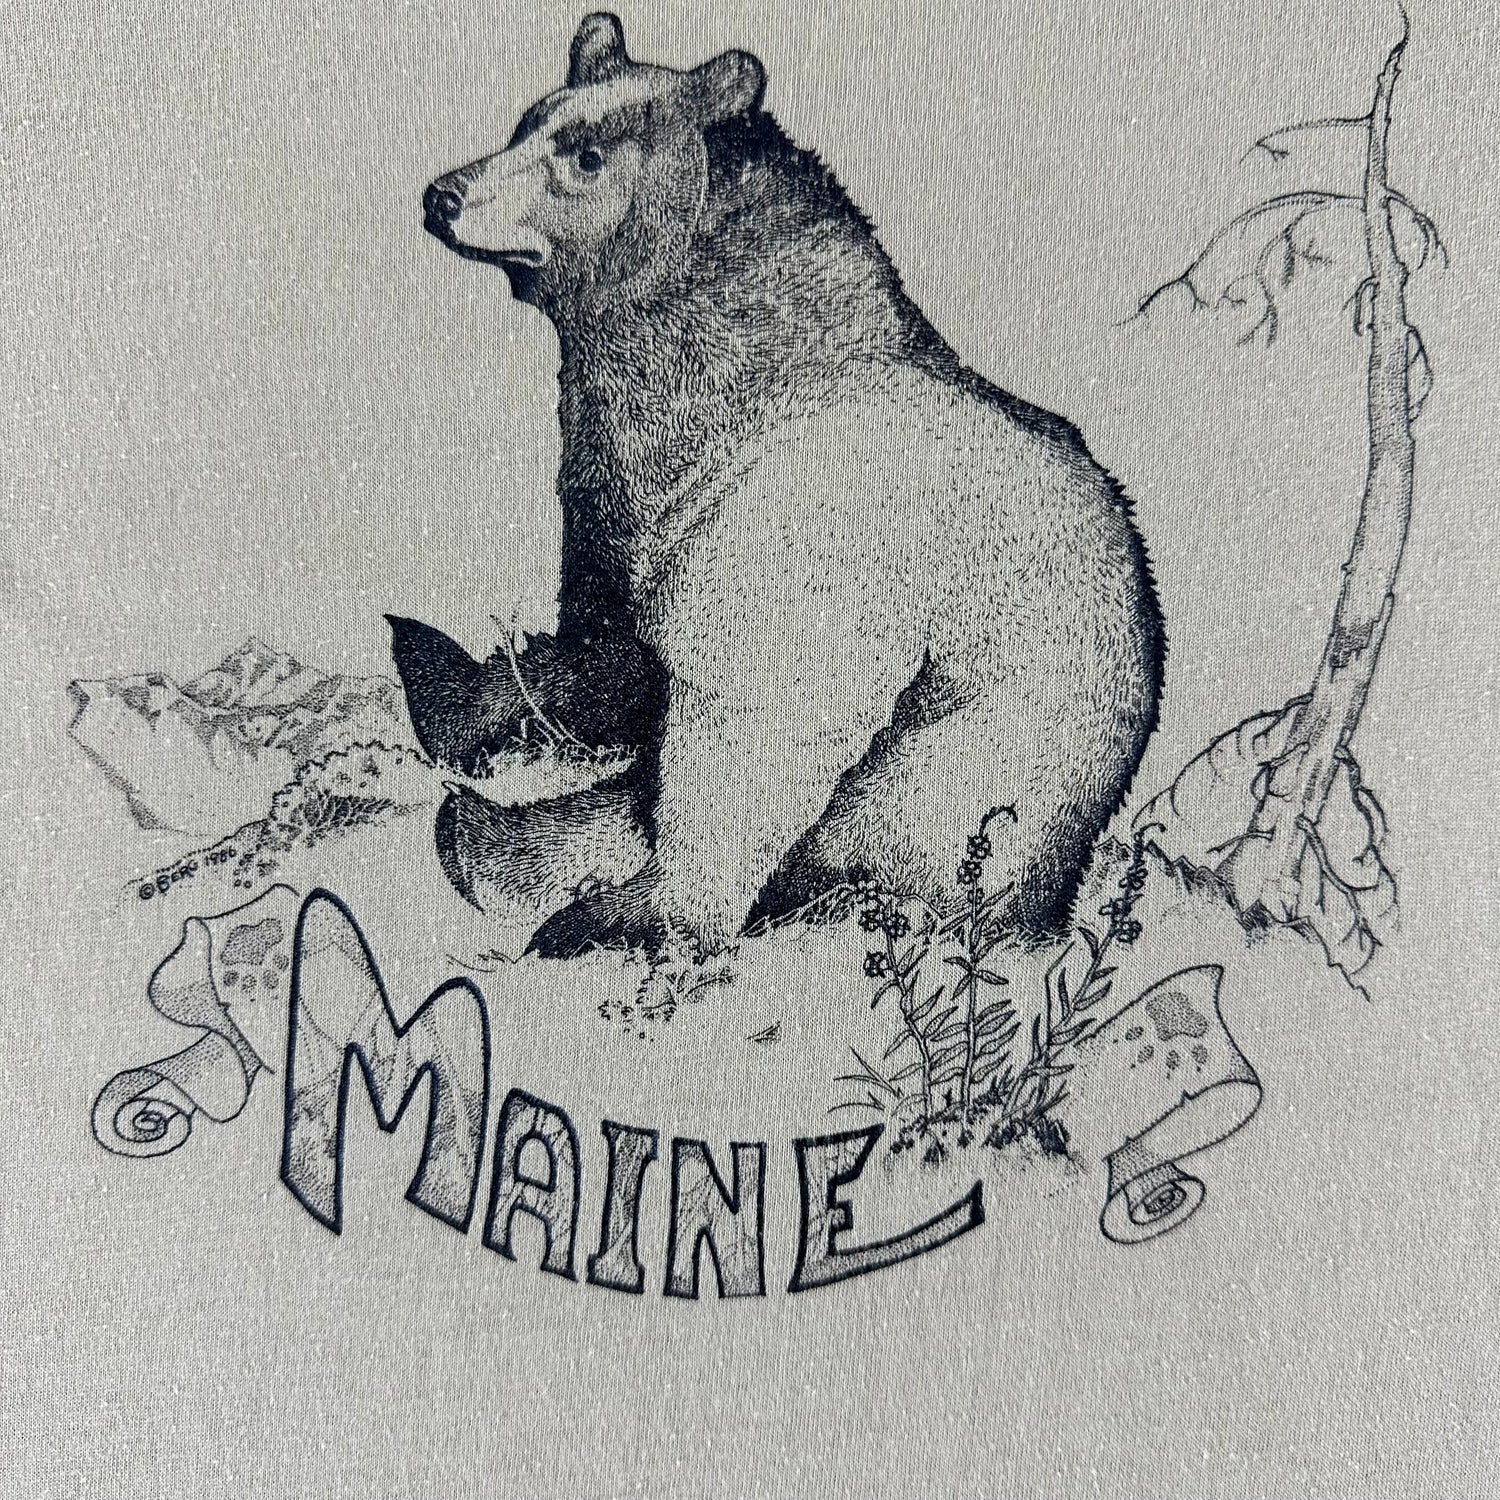 Vintage 1980s Maine T-shirt size Small